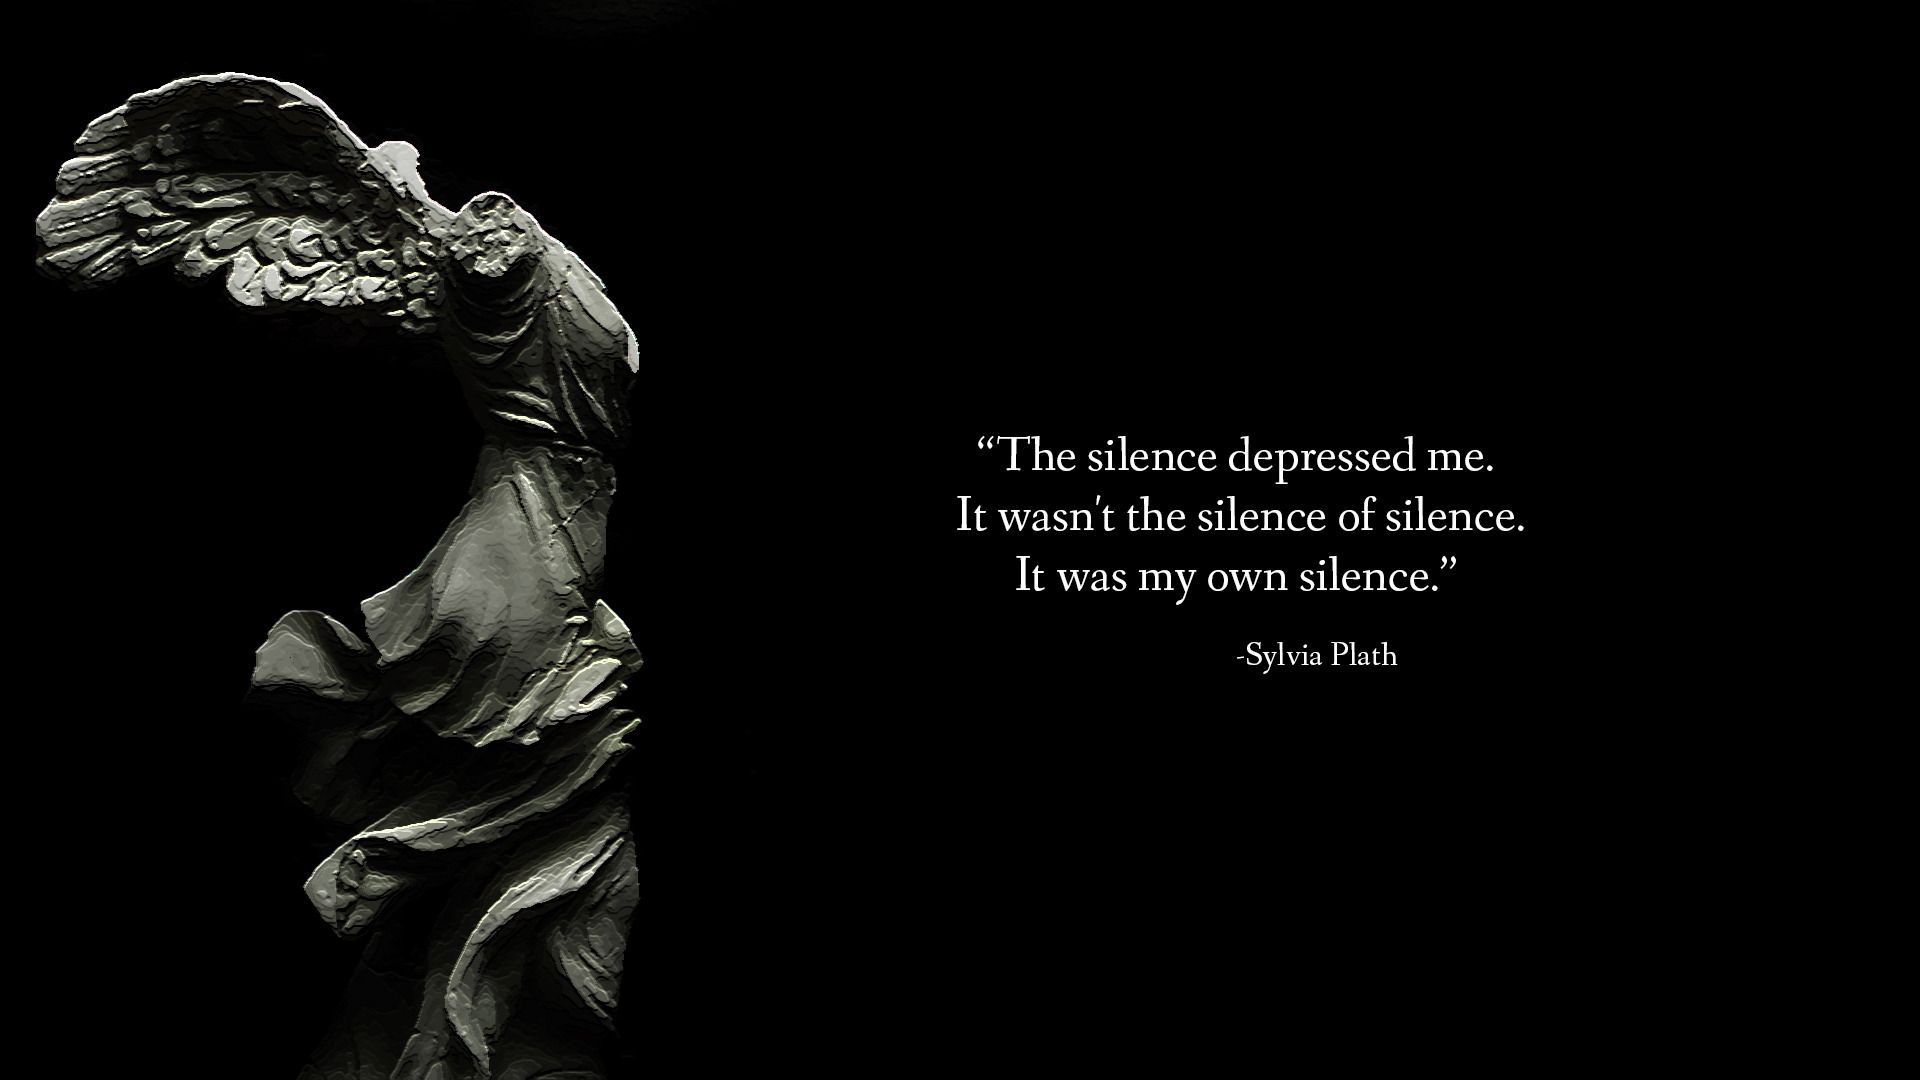 Free download sylvia plath on depression quote HD wallpaper 1920x1080 9801 [1920x1080] for your Desktop, Mobile & Tablet. Explore Depression Wallpaper. Sad Wallpaper Download, Depression Era Wallpaper, The Yellow Wallpaper Depression